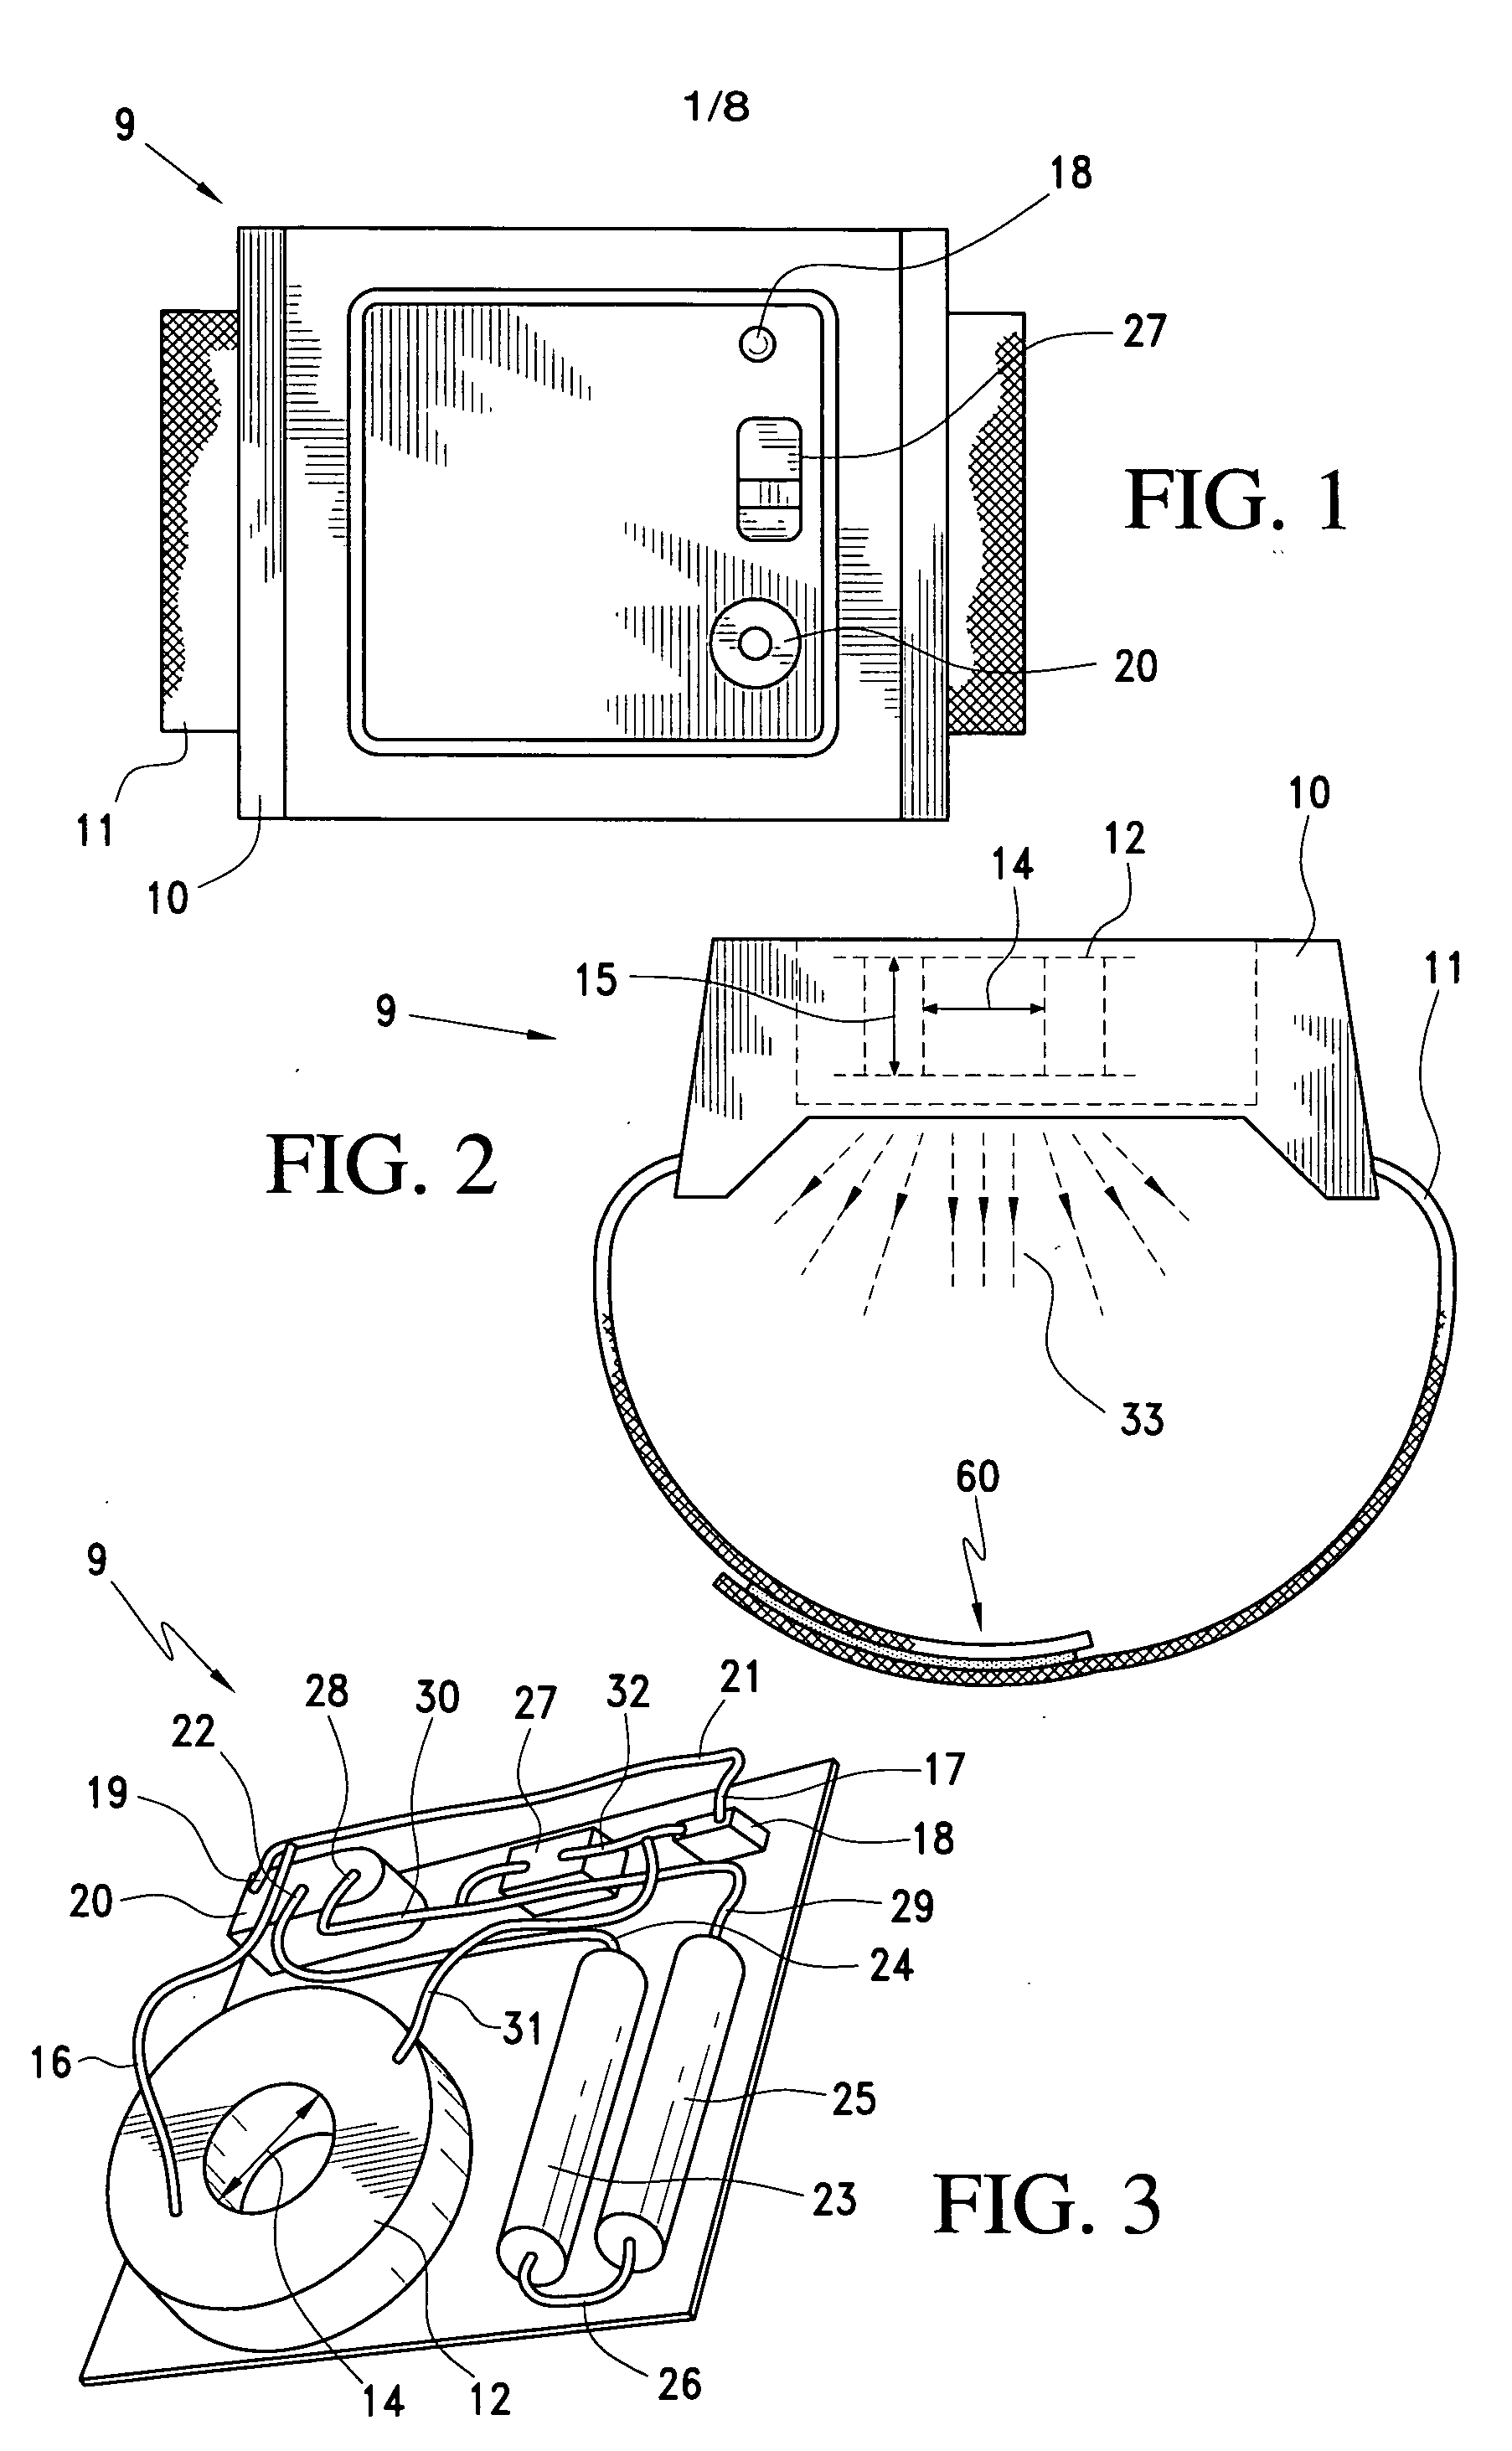 Method and apparatus for therapeutic treatment of inflammation and pain with low flux density, static electro-magnetic fields